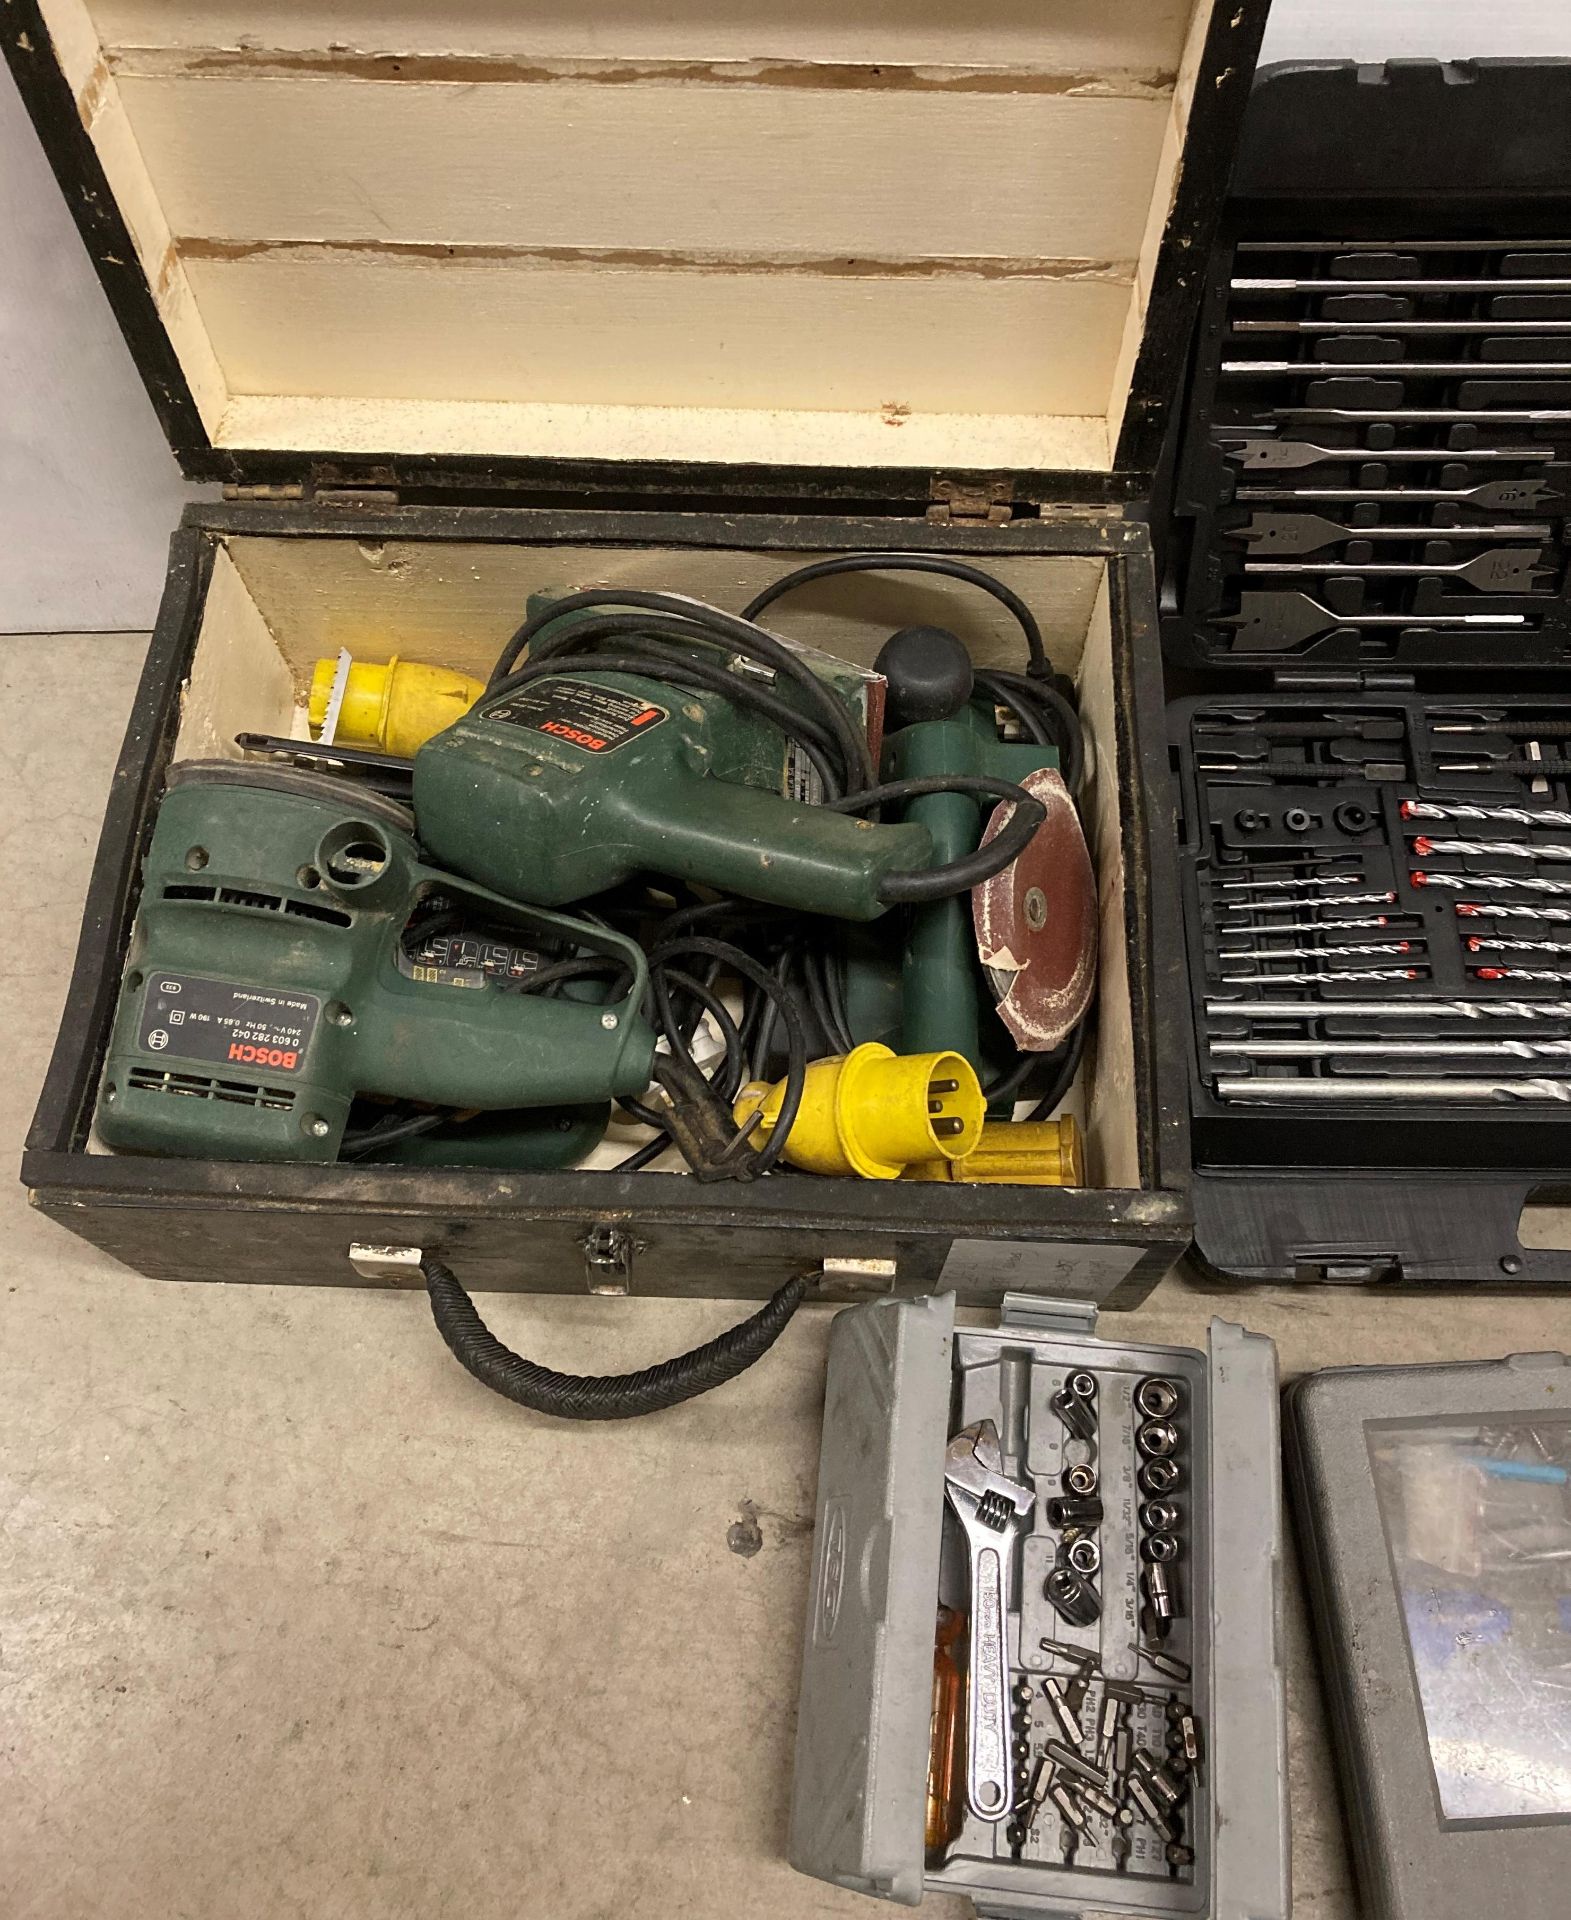 Contents to wooden tool box - 3 x power tools by Bosch - including a disc sander, jigsaw, plane, - Image 3 of 3